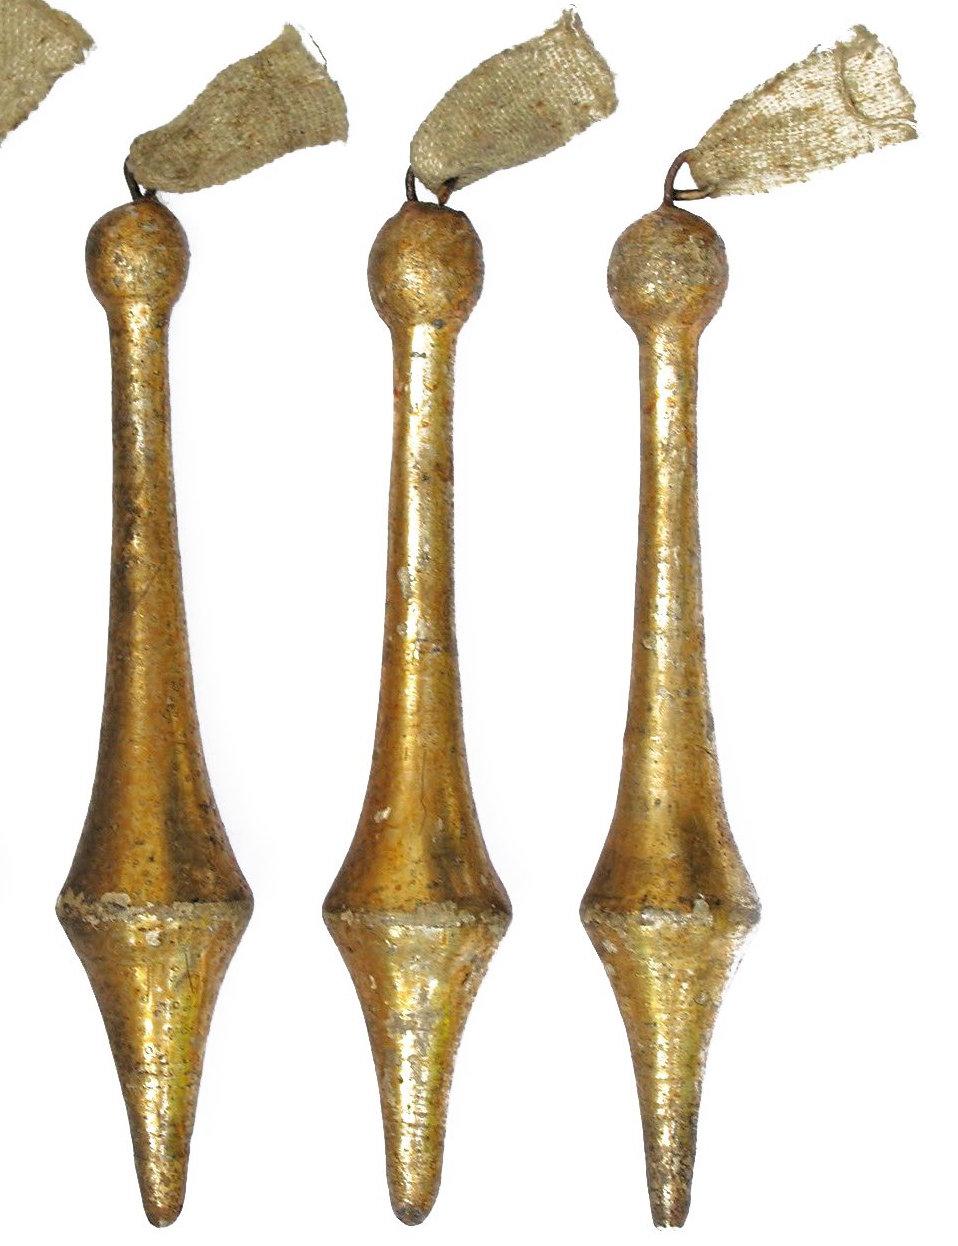 18th century Italian gold leaf tassel ornaments.

The tassels originally came from an 18th century Italian chandelier. They are hand-carved and hand-painted. Can be configured into holiday ornaments and decorations to recreate a Rococo-style